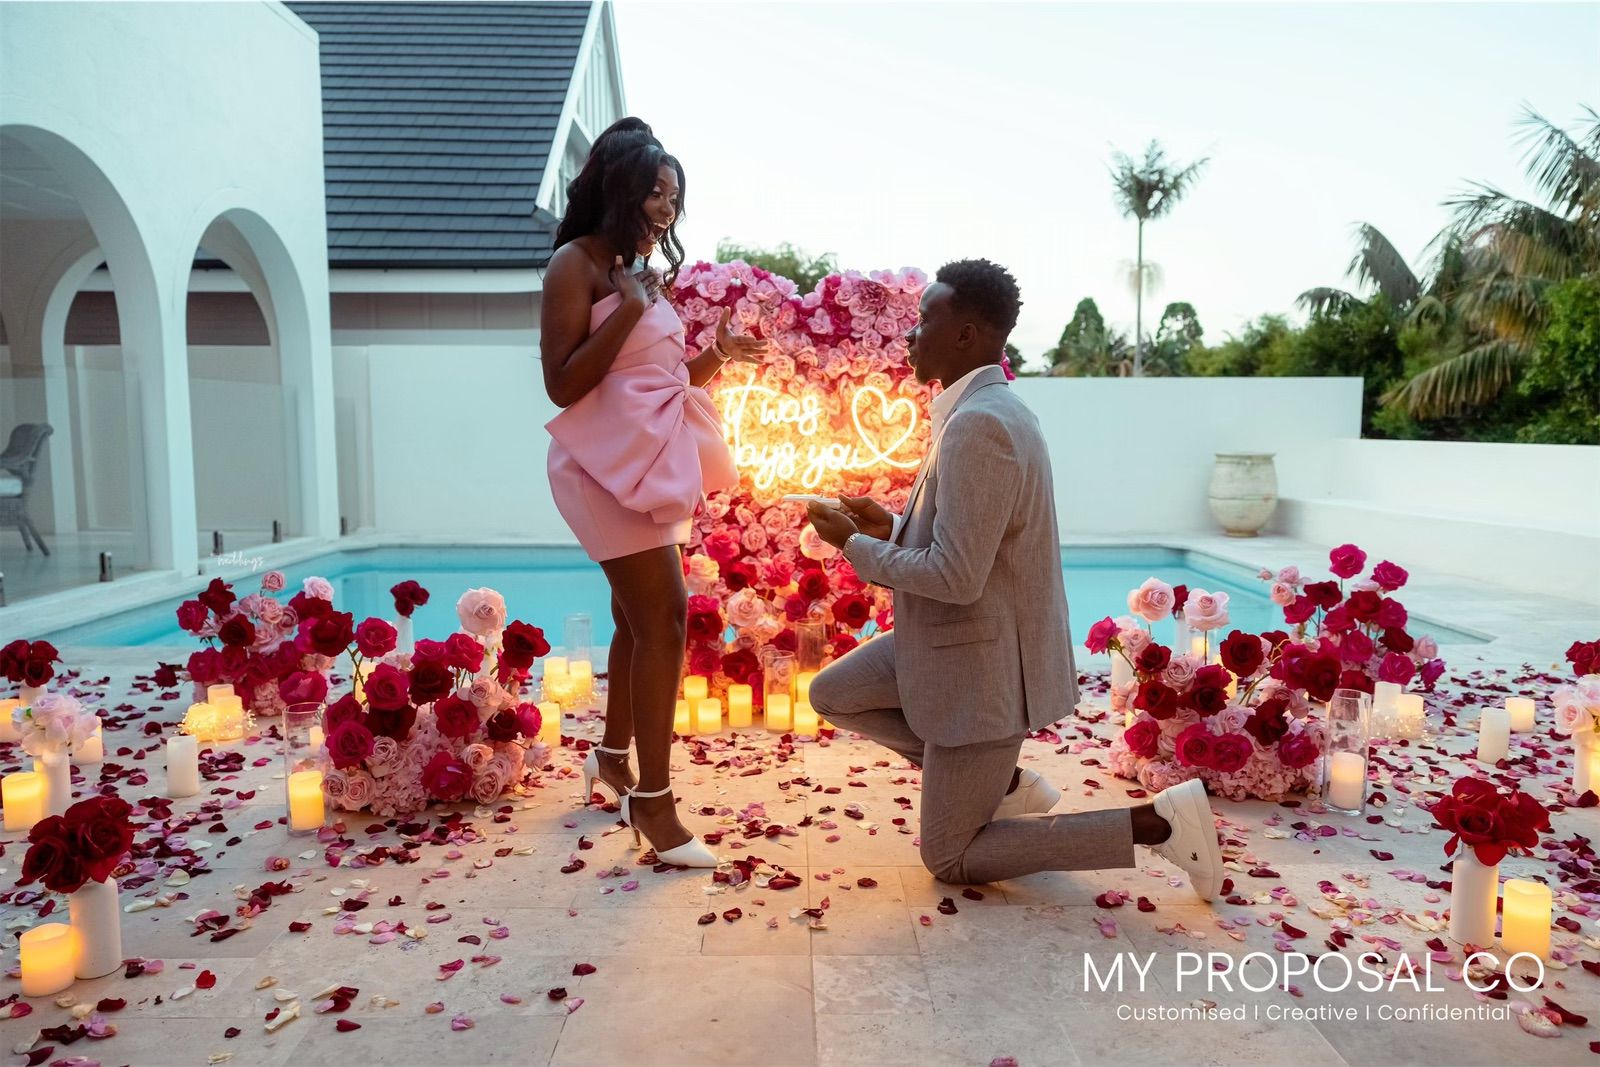 Ayodeji & Retmun Met at an Engagement Get together – Now, They’re Engaged!